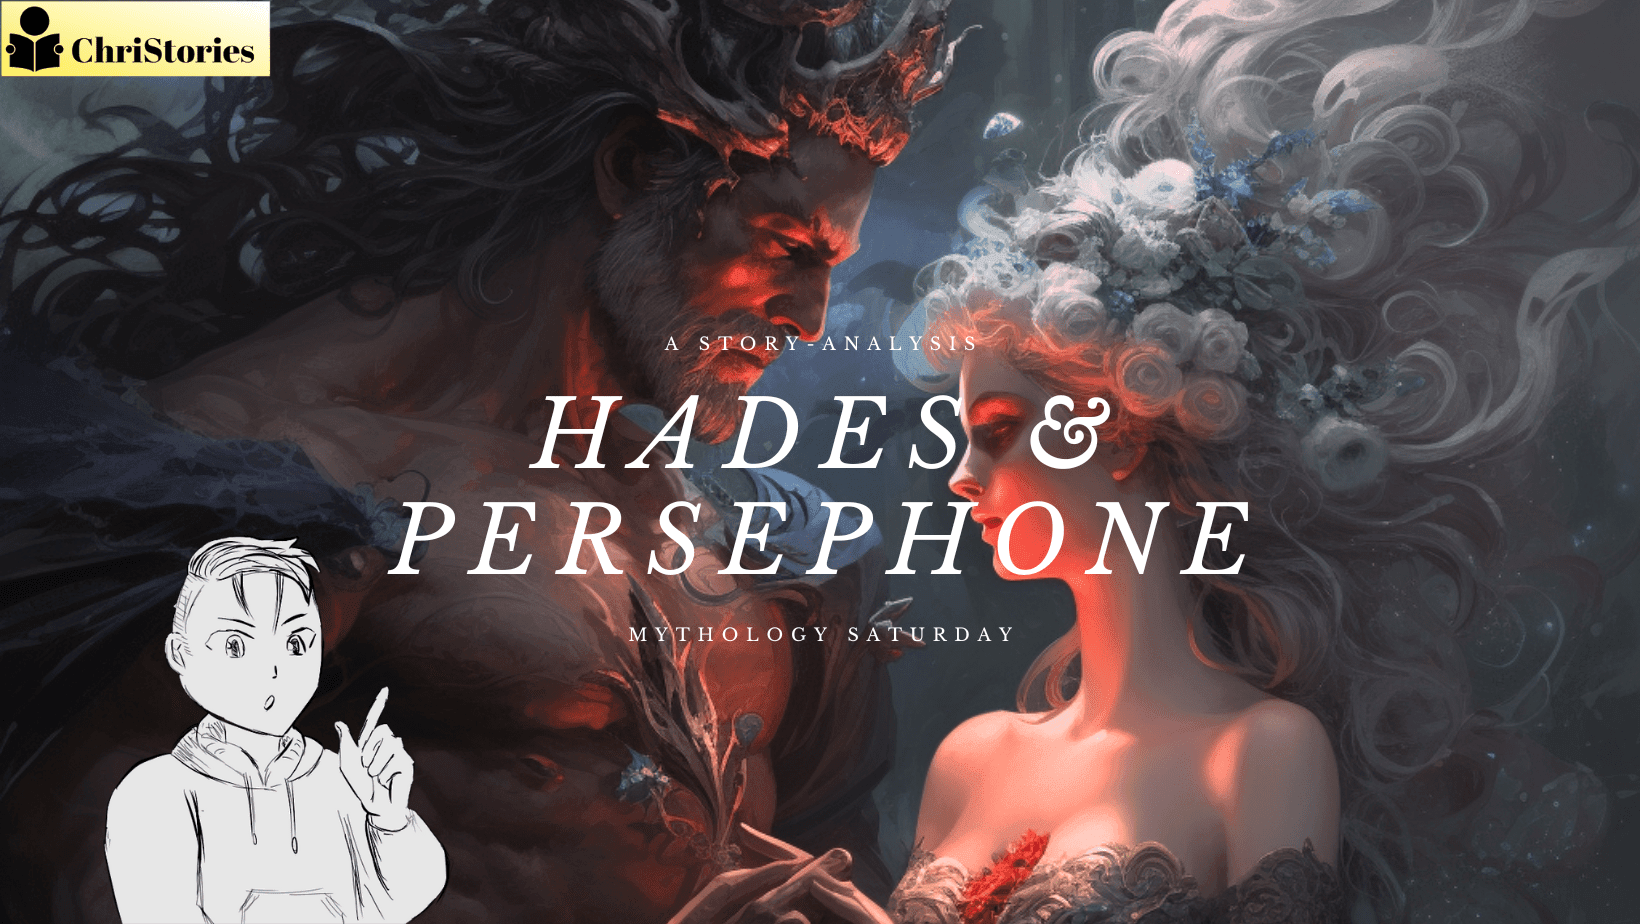 The Myth of Hades and Persephone: The Origins of the Seasons